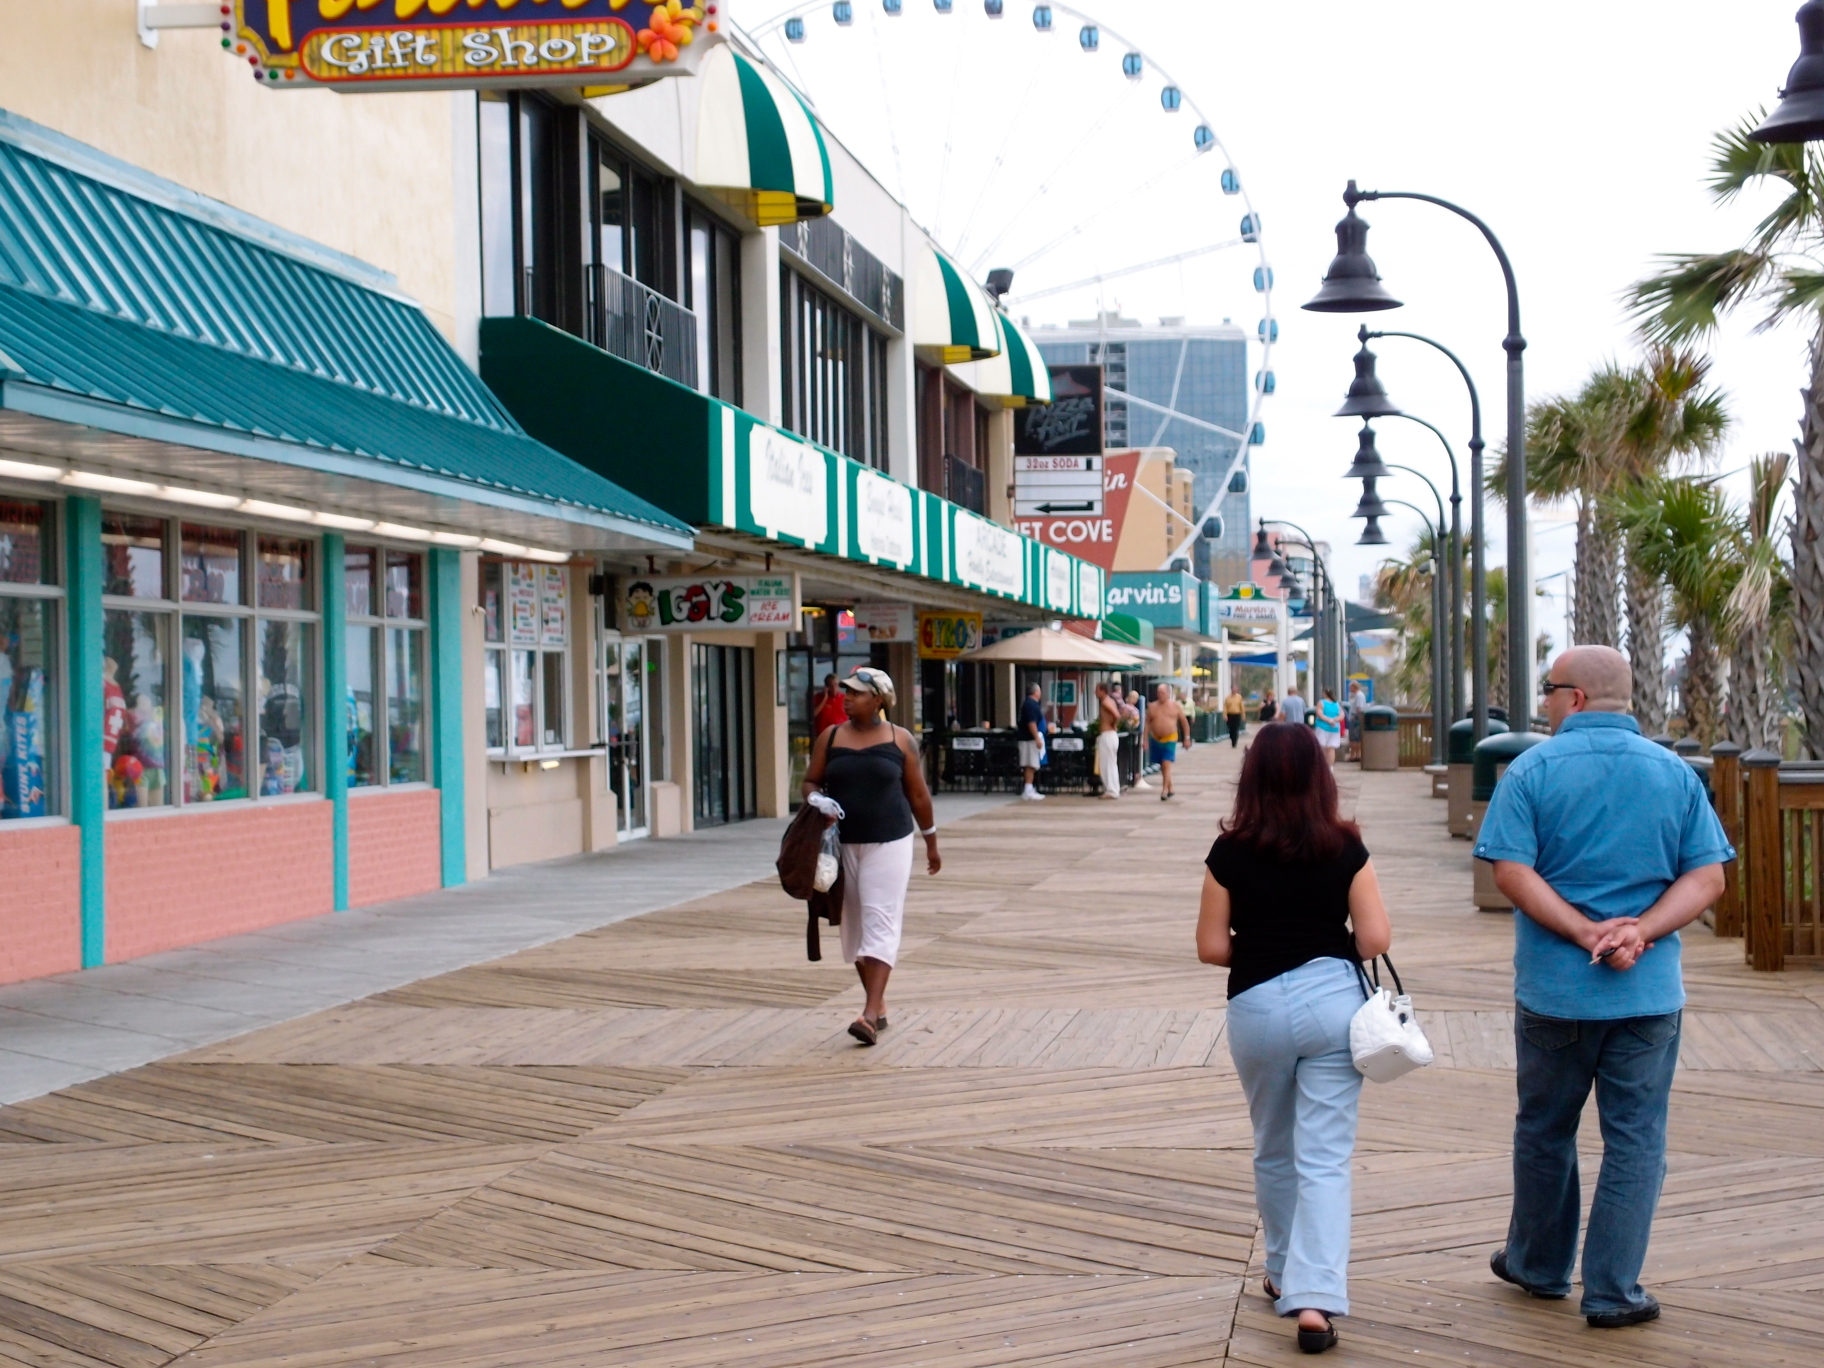 people walking on the boardwalk near shops and stores